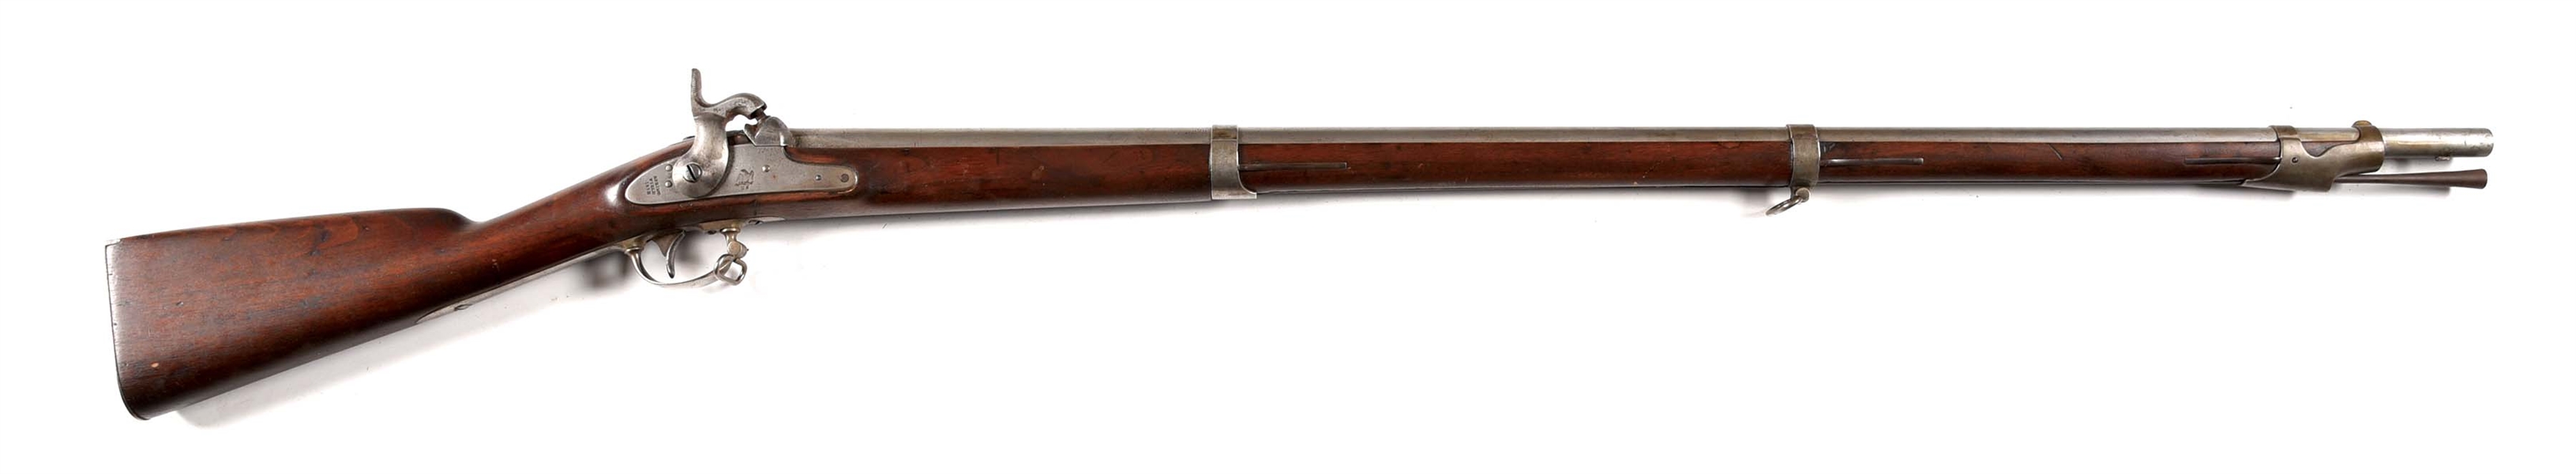 (A) SPRINGFIELD 1851 CADET PERCUSSION MUSKET.